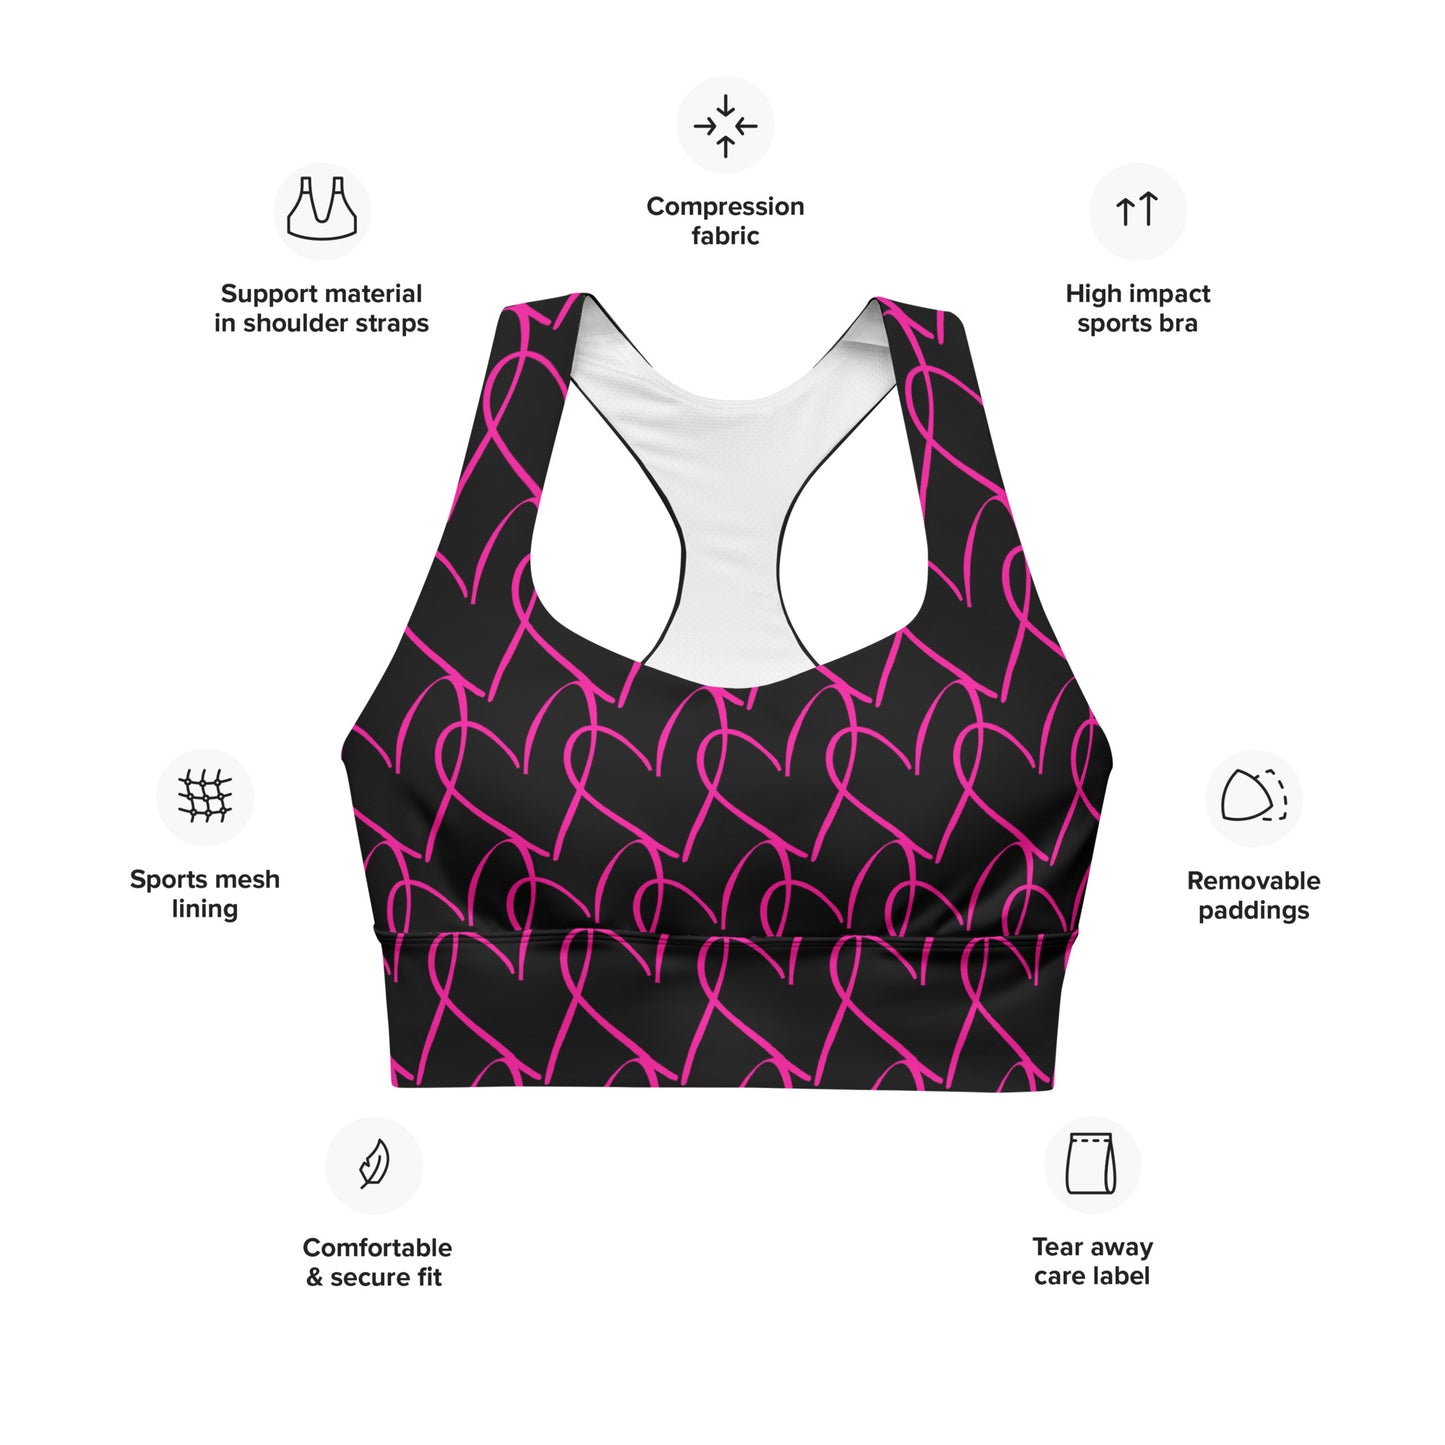 ICONIC Heart Max Support Sports Bra